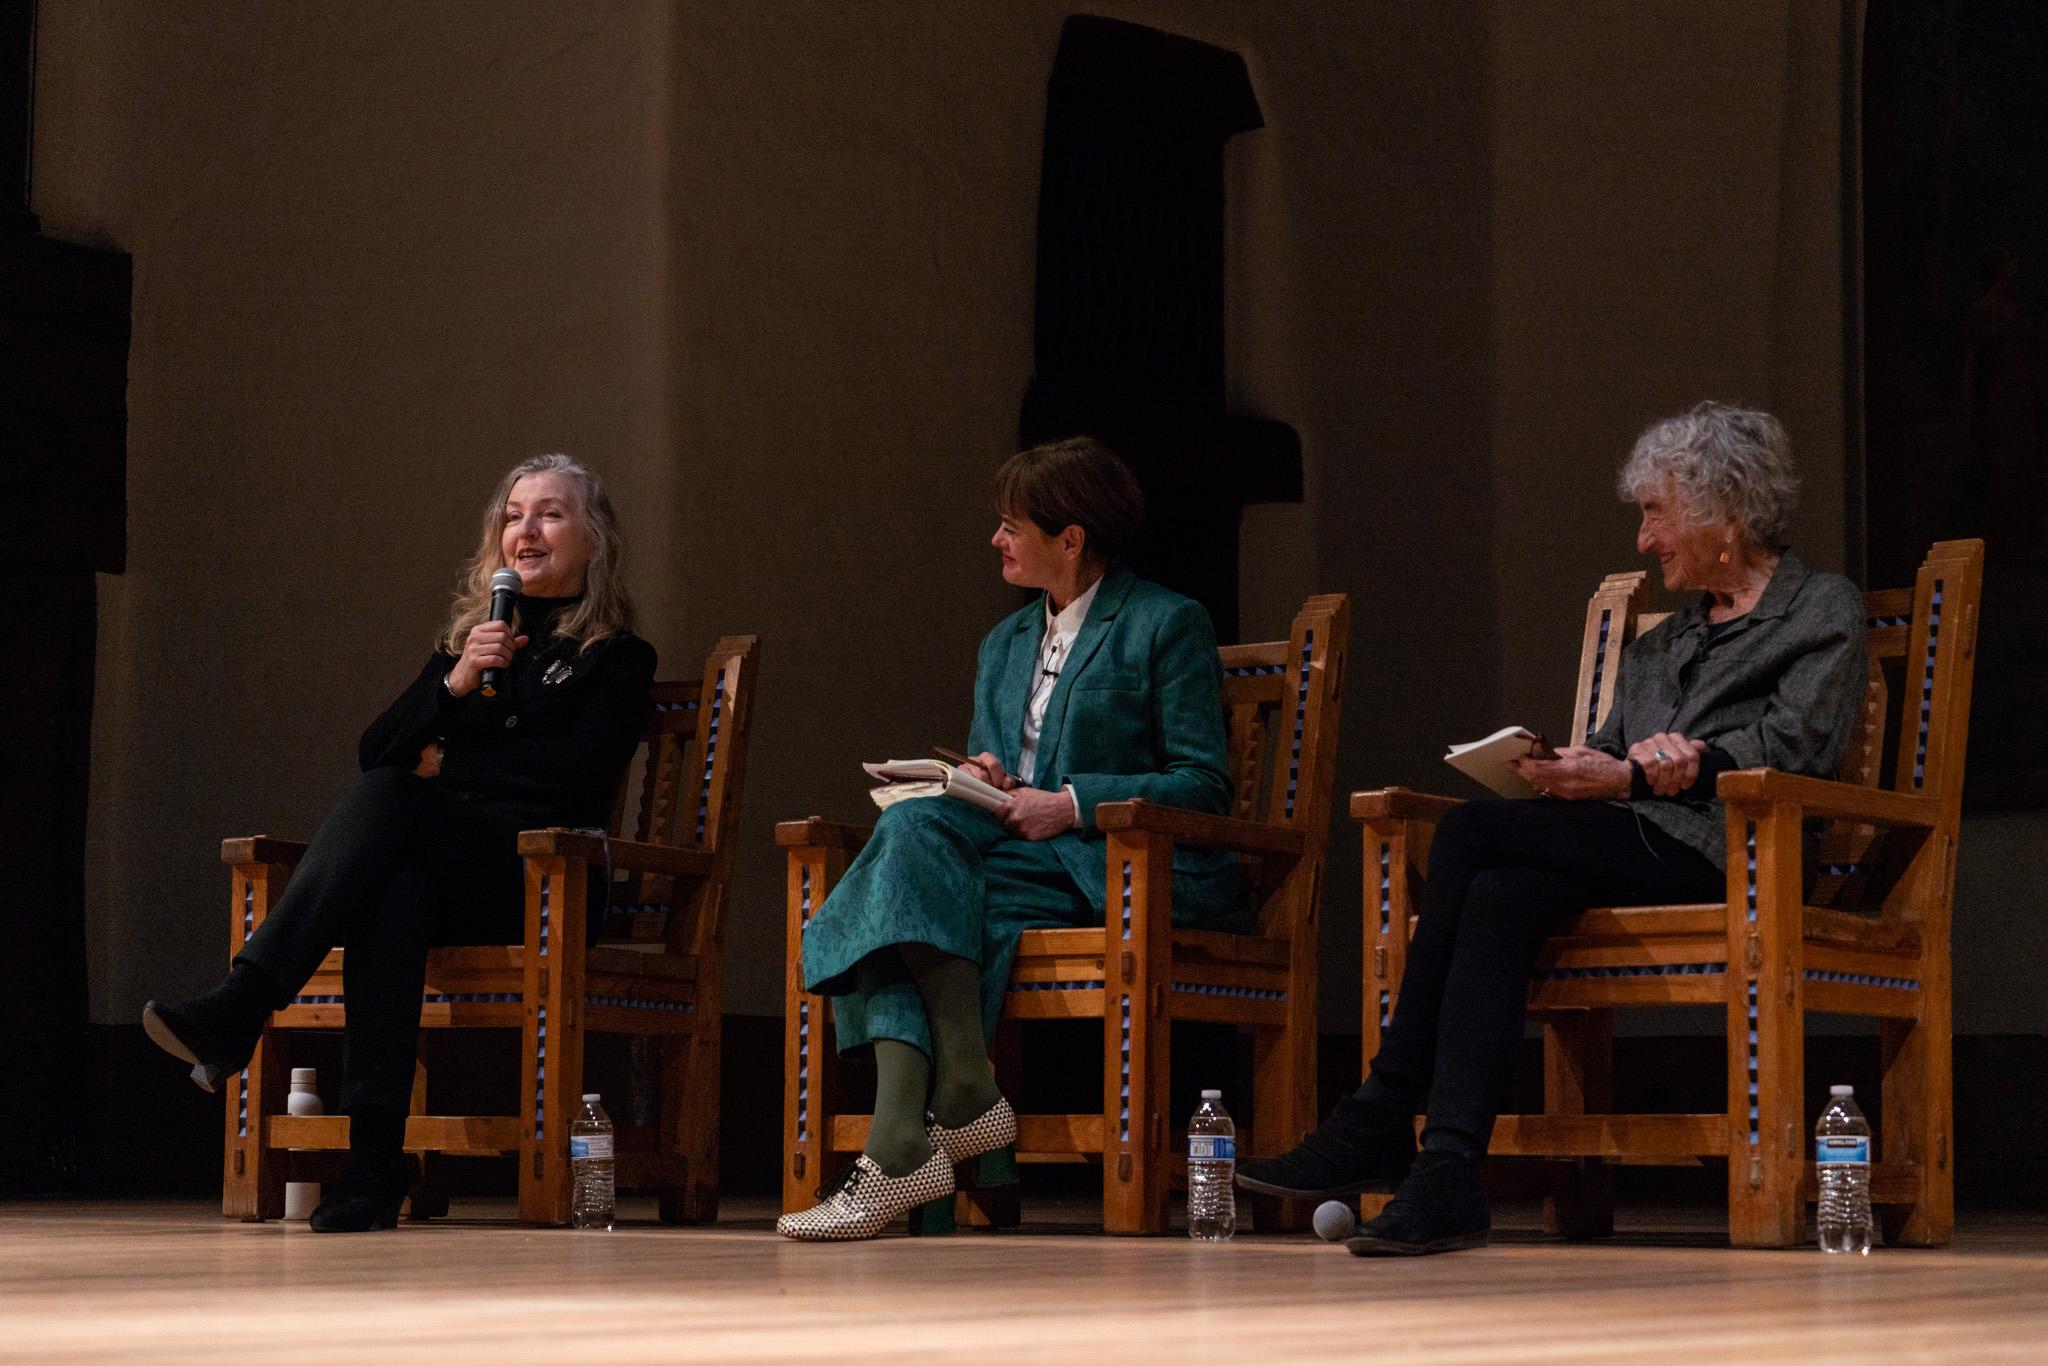 Rebecca Solnit, Lisa Le Feuvre, and Lucy Lippard in conversation at the 2023 Holt/Smithson Foundation Annual Lecture at the New Mexico Museum of Art